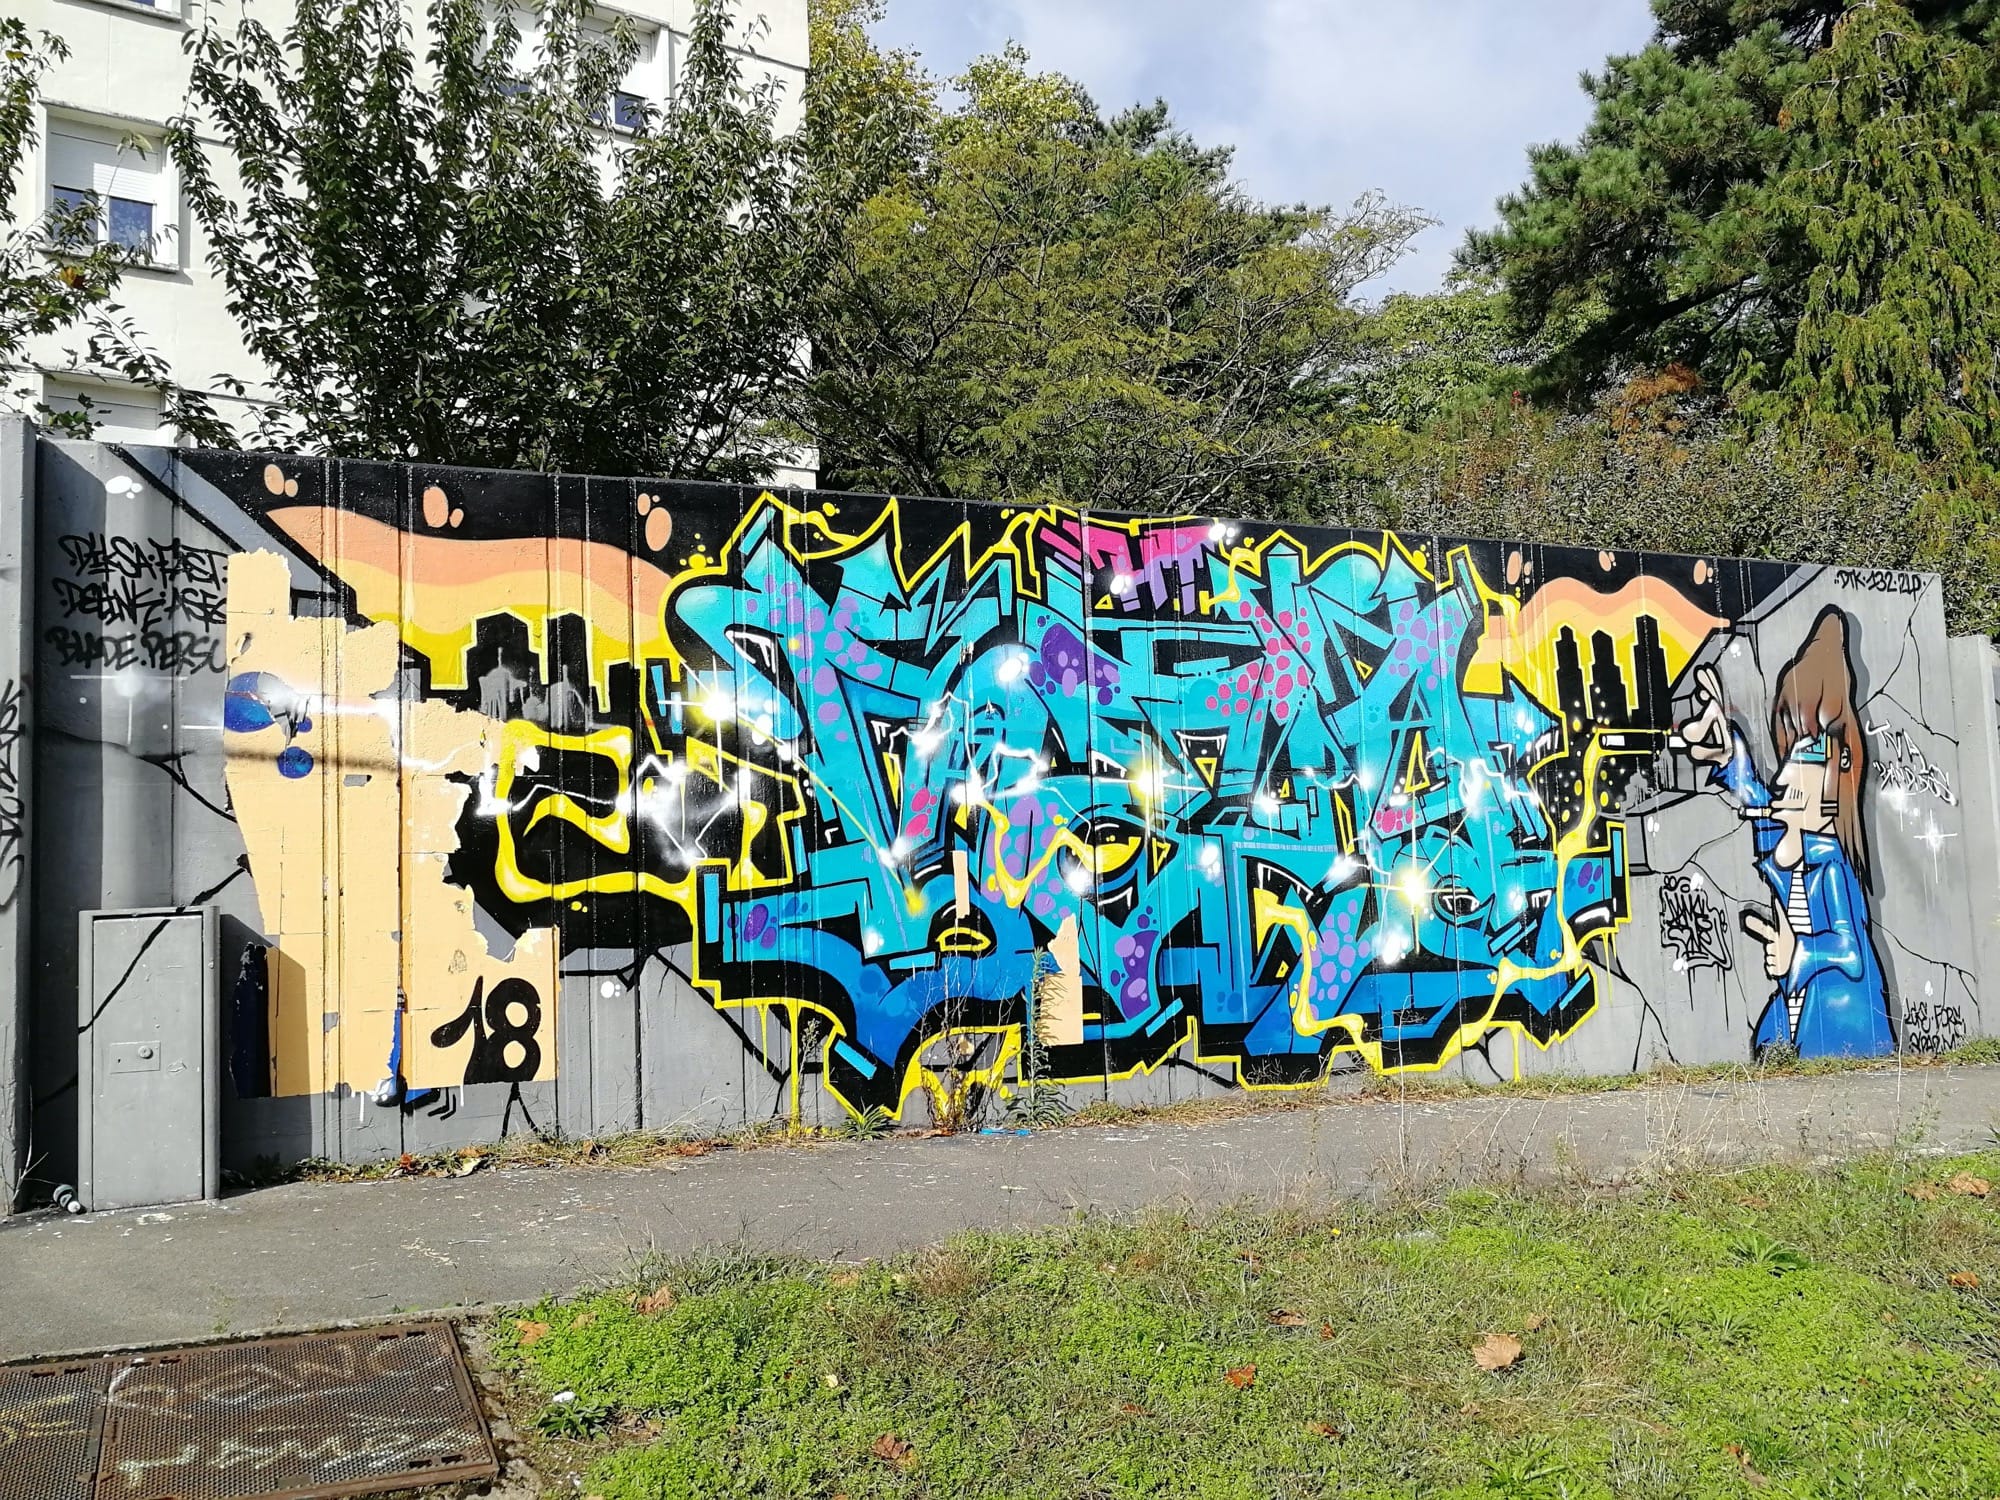 Graffiti 4489  captured by Rabot in Nantes France